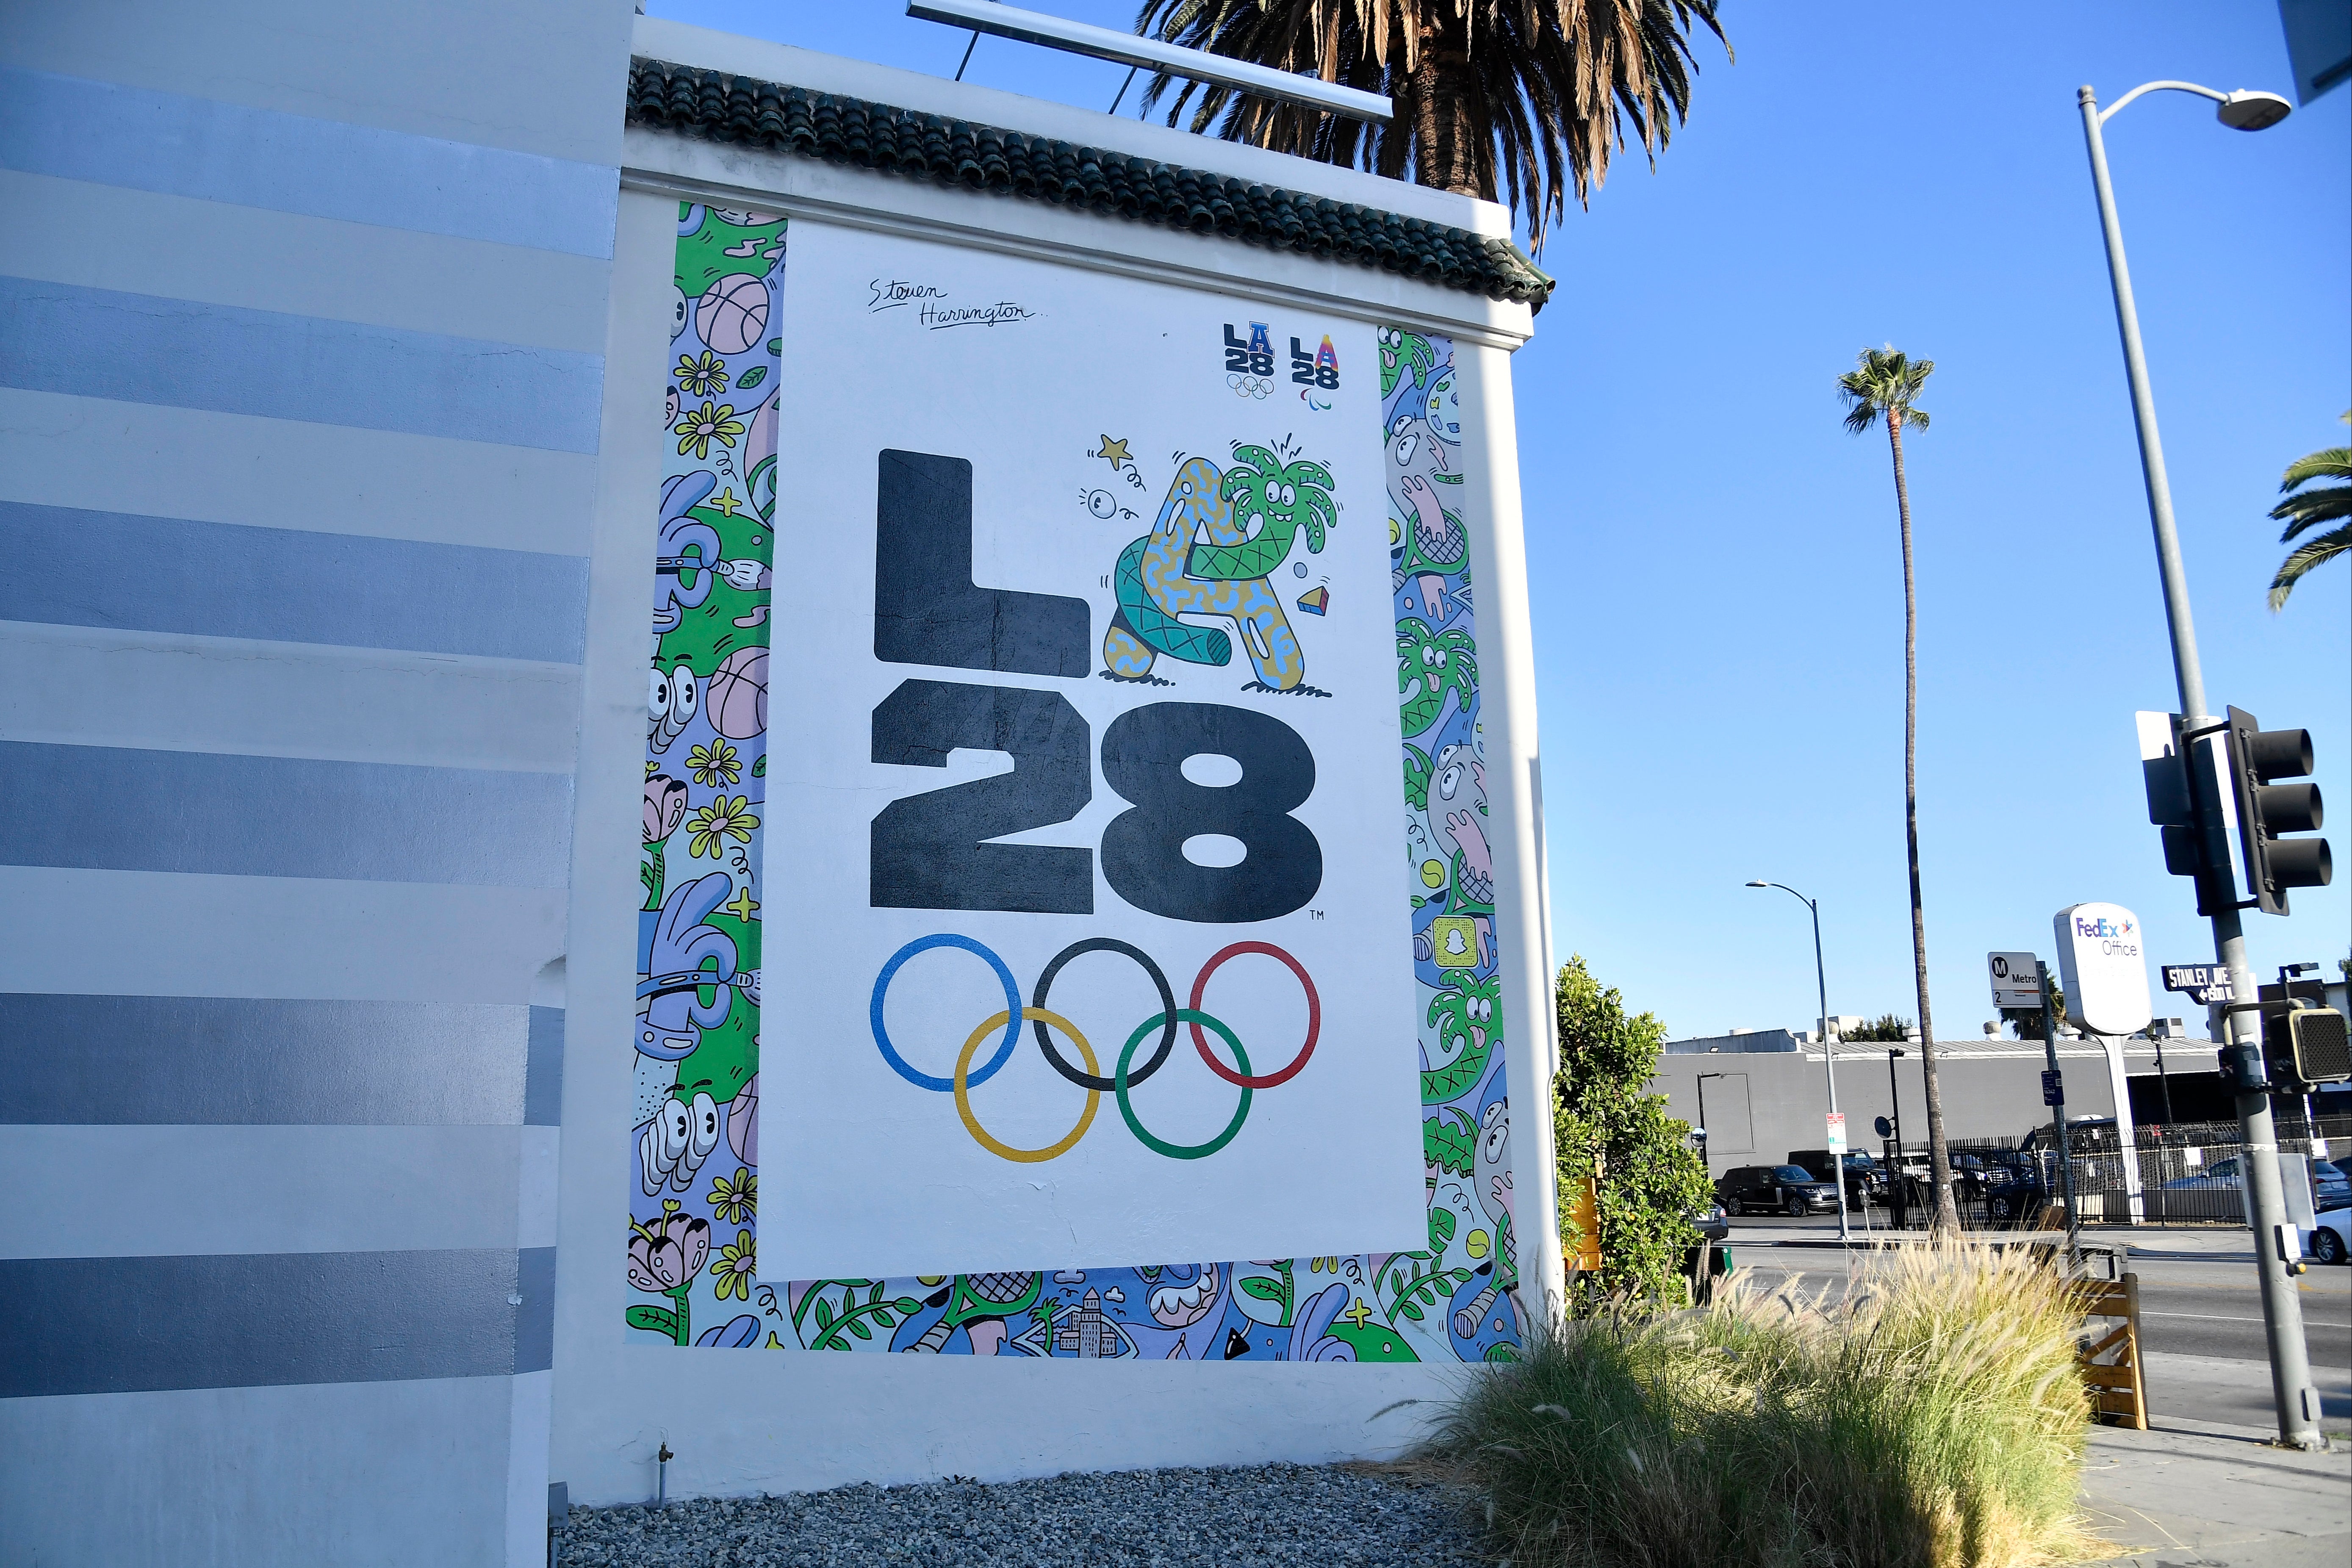 The continent championships will serve as a key qualifier for LA 2028